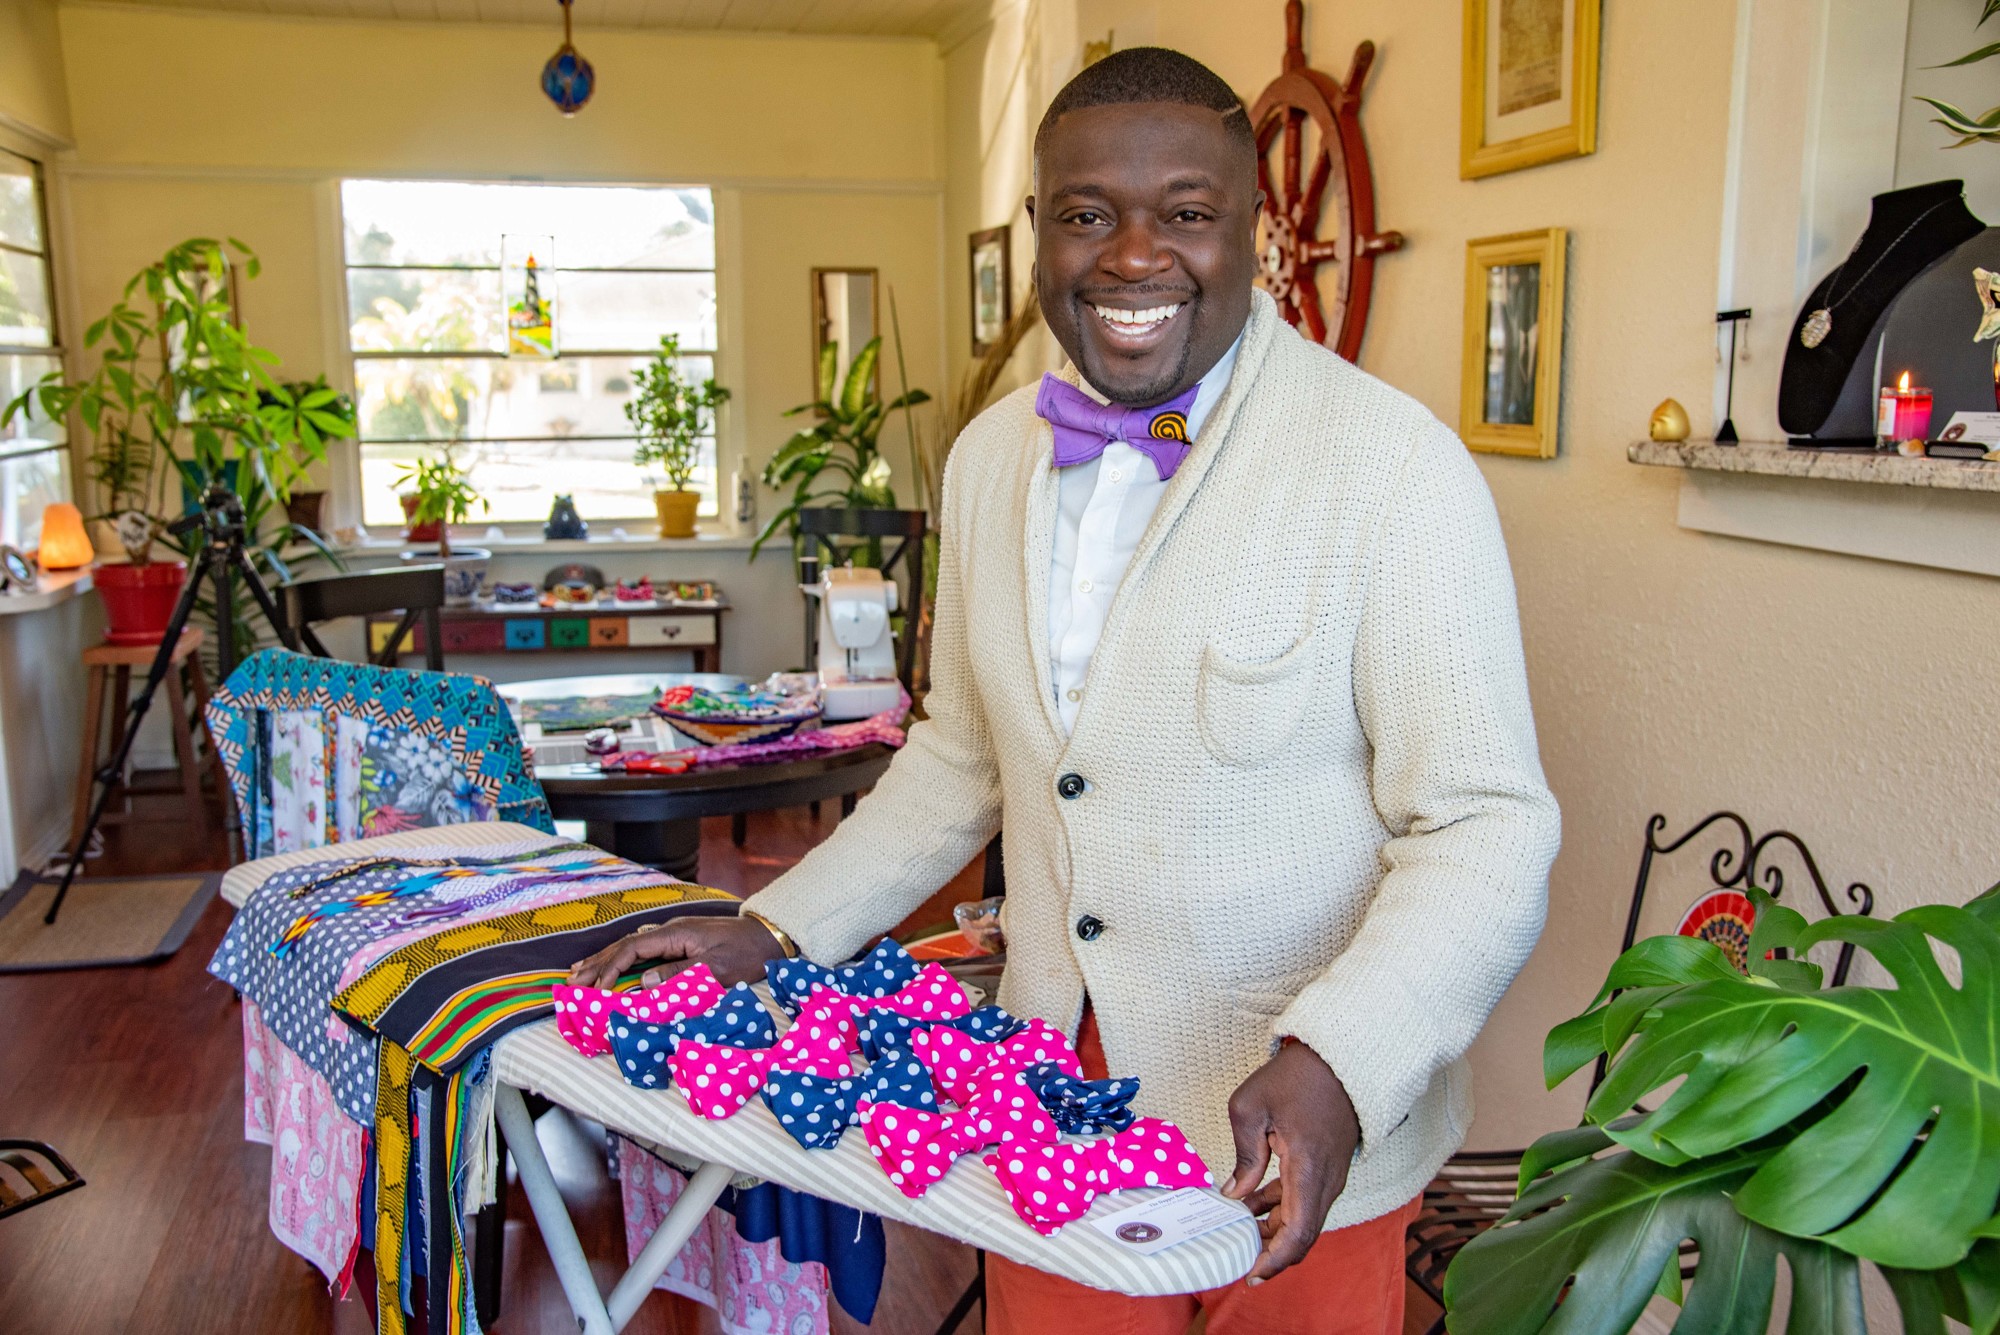 Courtesy. During the pandemic, Travis Ray has focused on adding more items to his website for Dapper Bowtique.